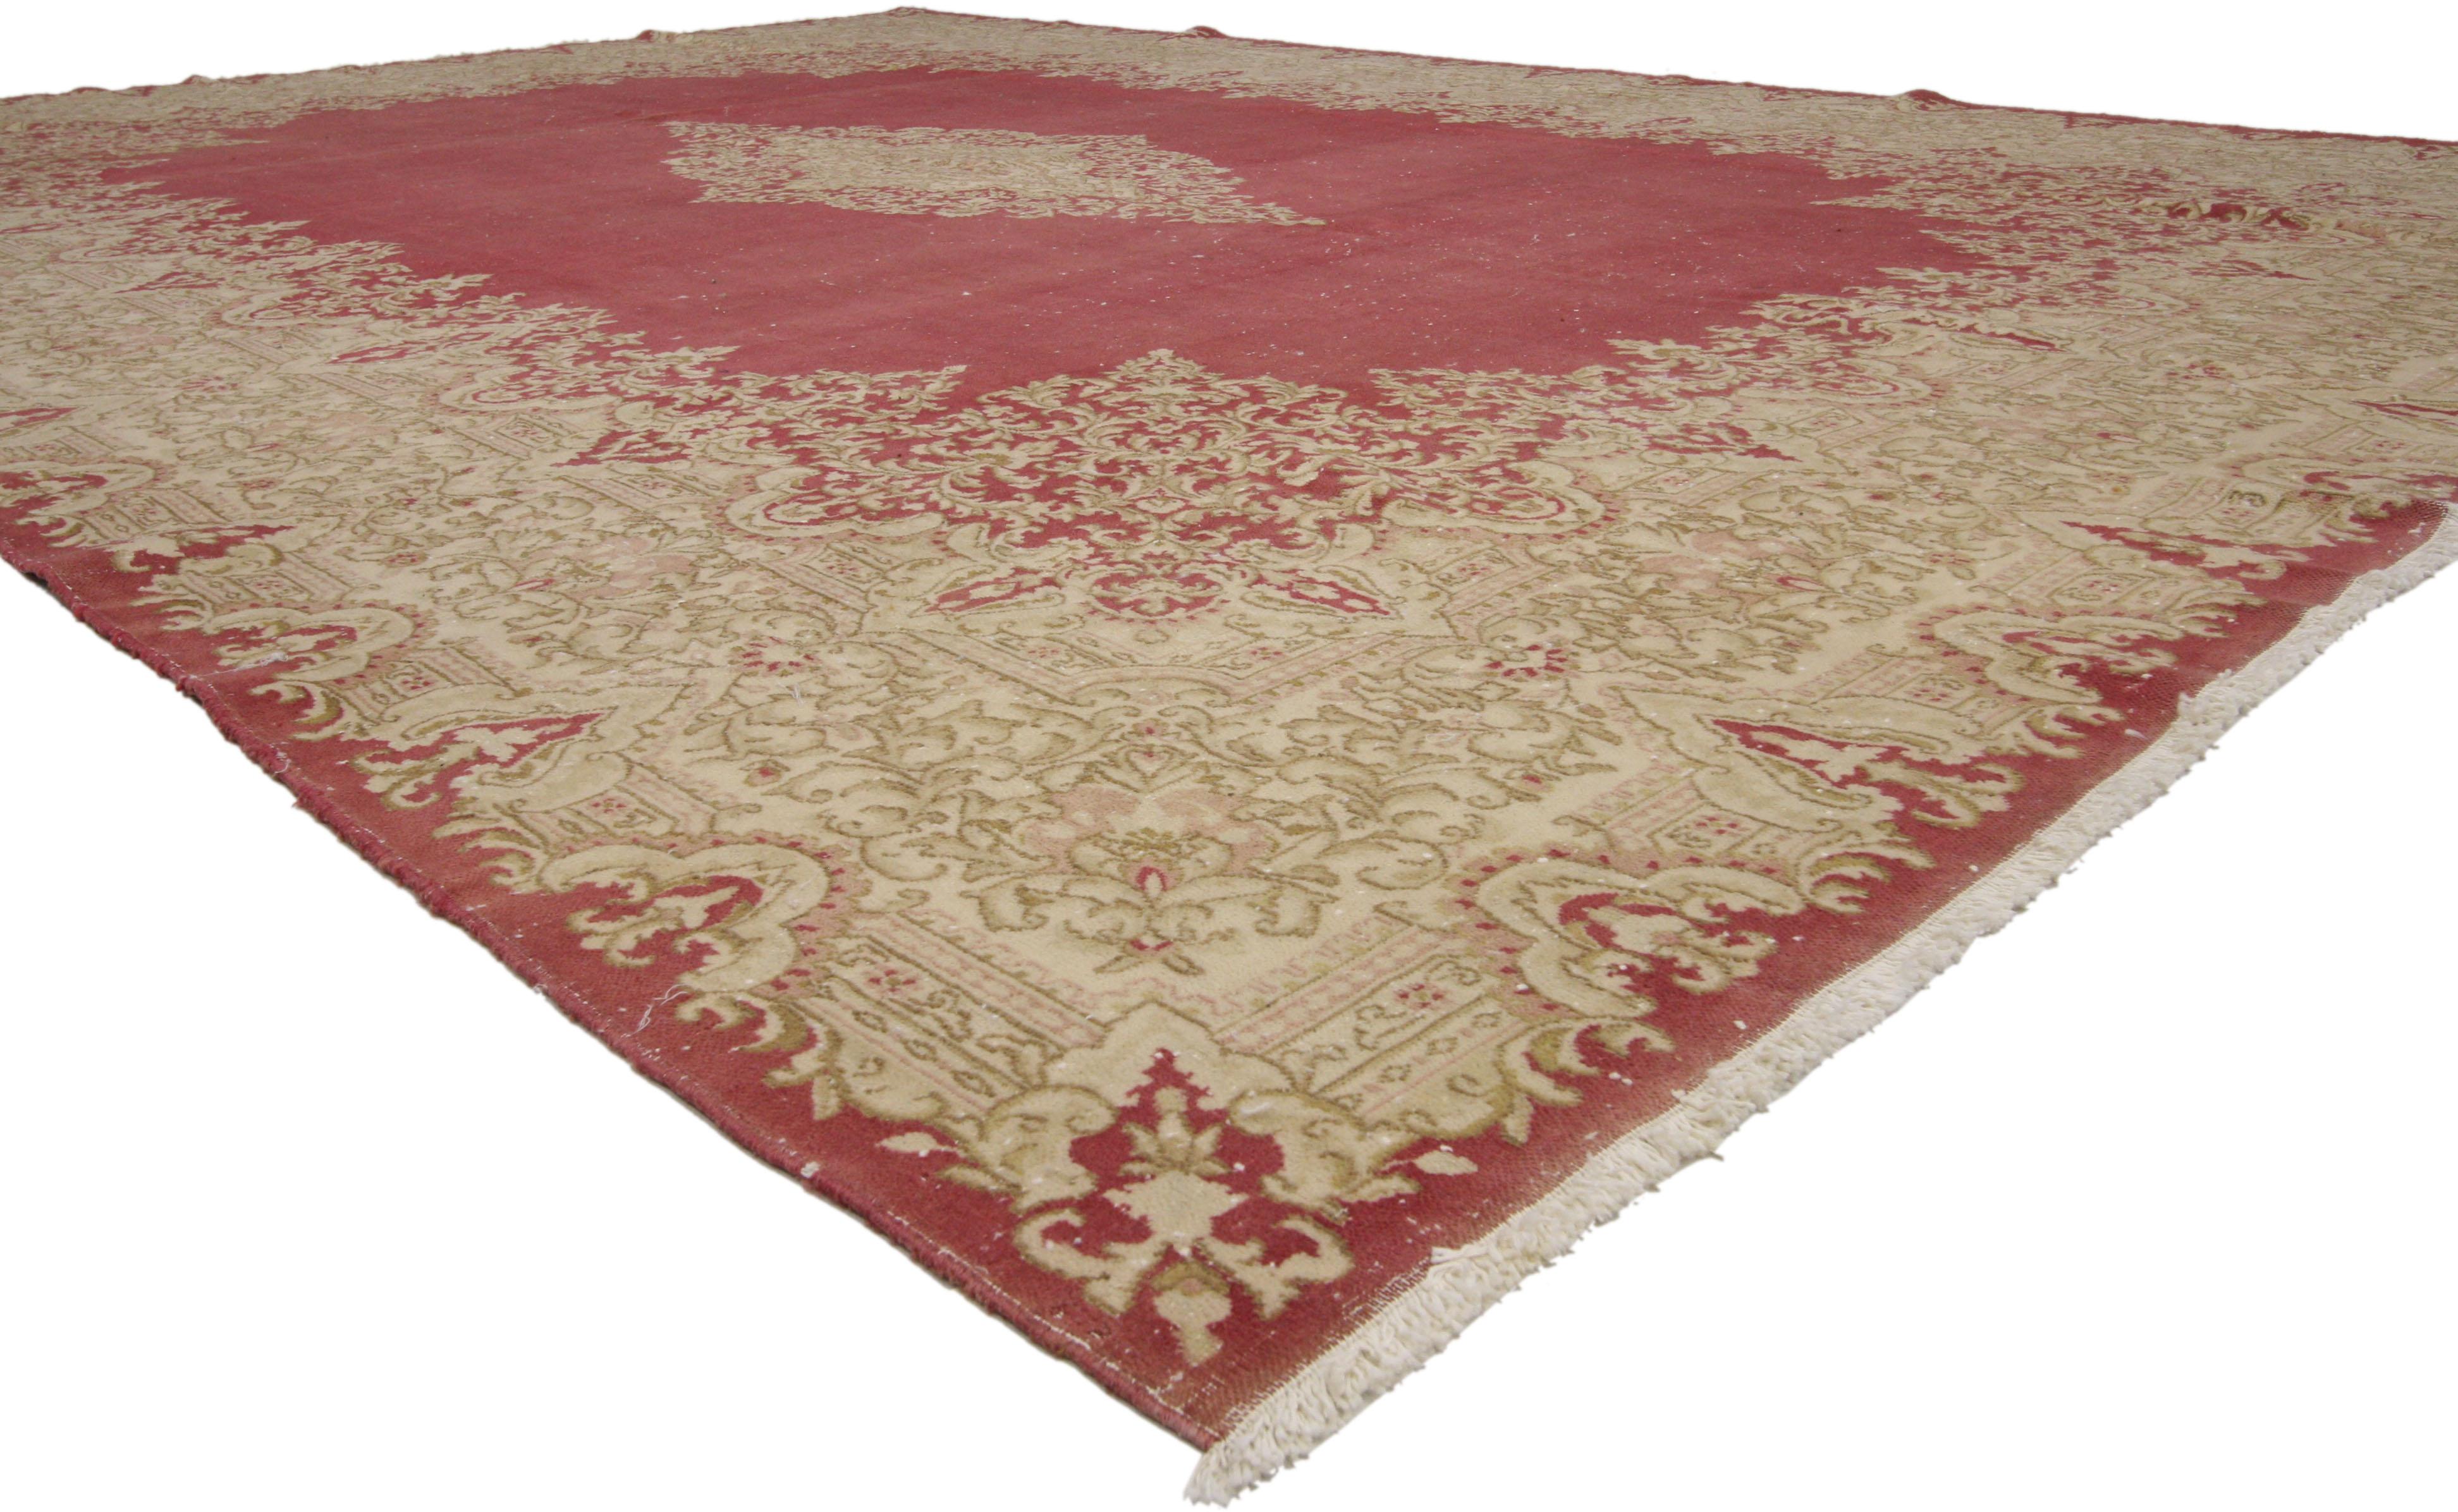 74921 distressed vintage Persian Kirman area rug with French Victorian style, Kerman rug. This French Victorian-era style Kirman palace size rug is a stunning visual display of flowers and architectural elements. An elaborate lobed Kirman medallion